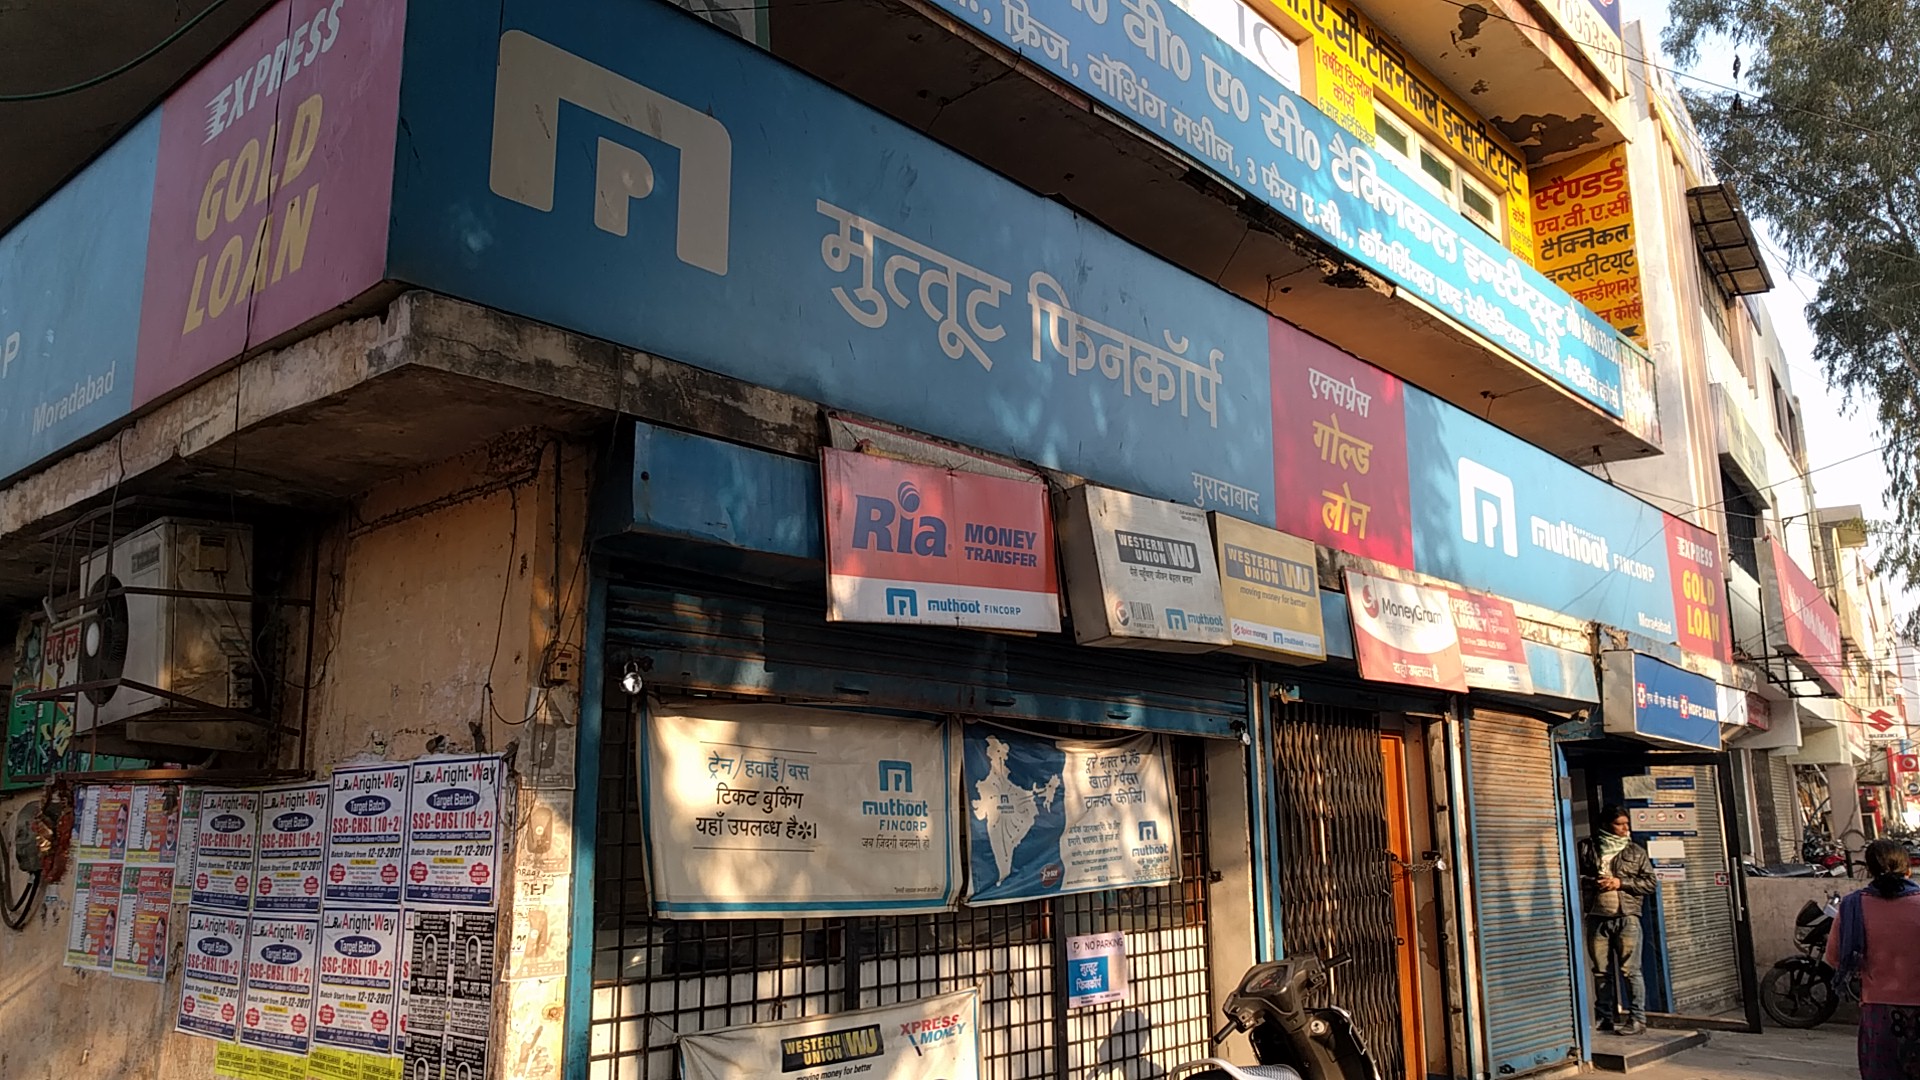 Photos and Videos of Muthoot Fincorp Gold Loan in Gandhi Nagar, Moradabad